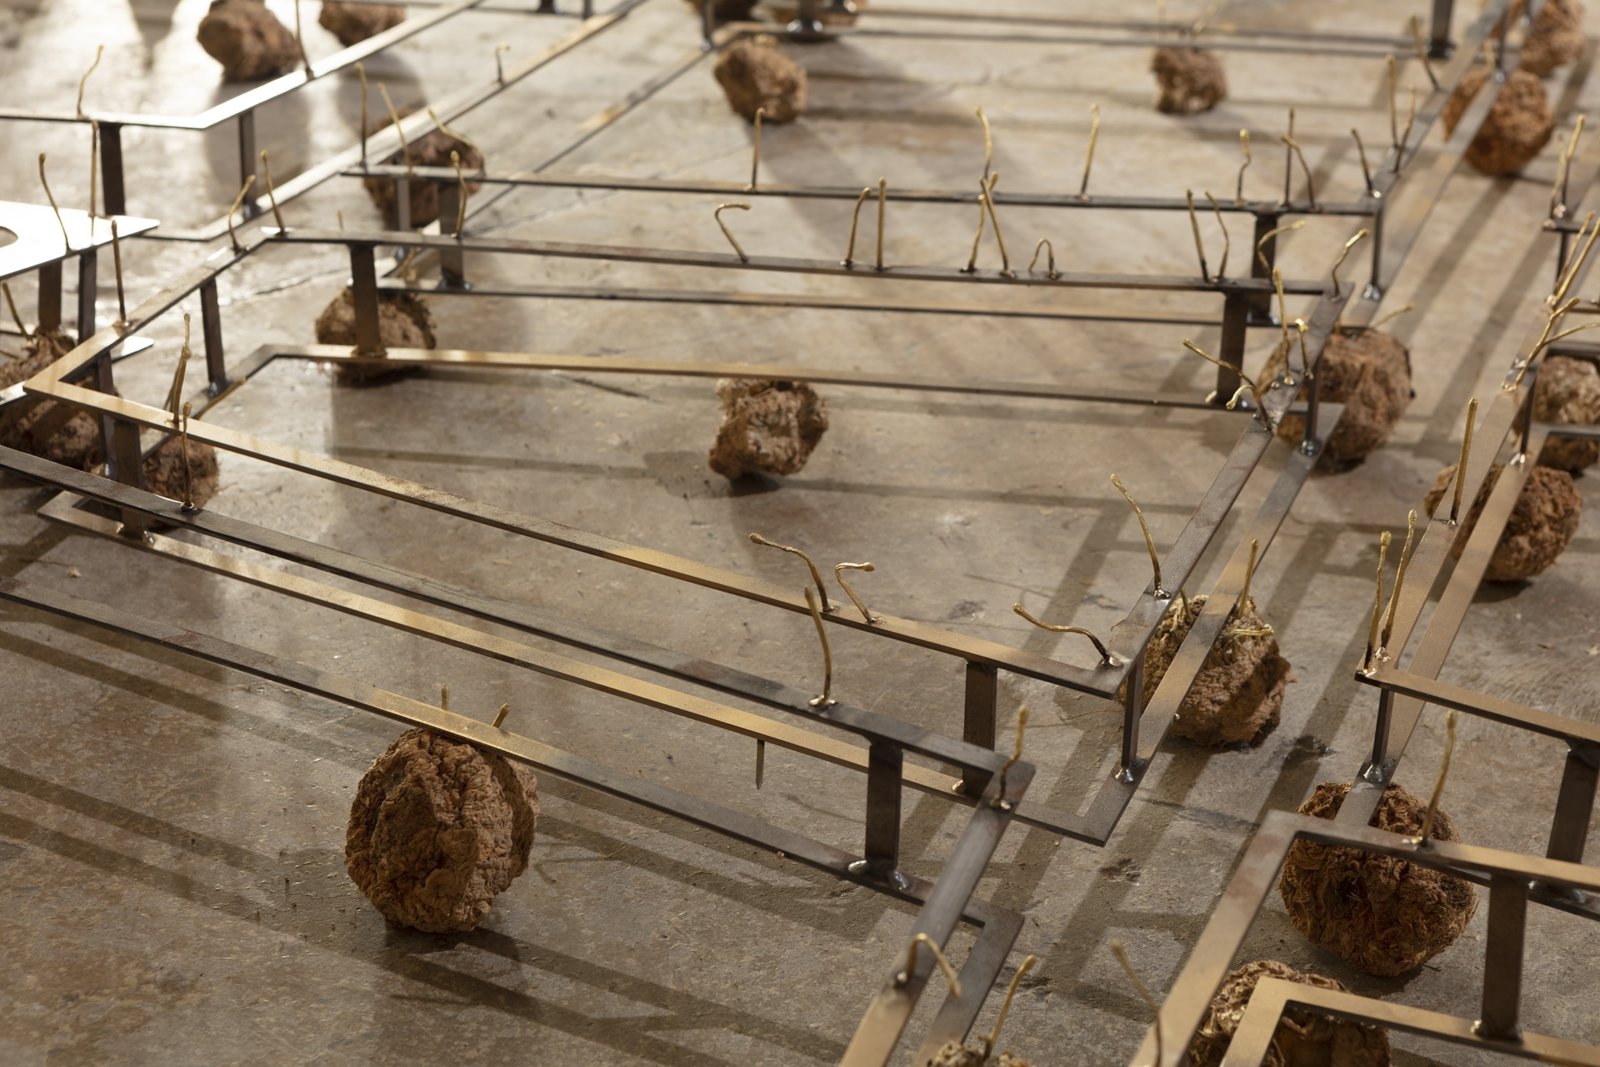 Rochelle Goldberg, Track (can you trigger the switch?) (detail), 2018, celeriac, steel, brass, dispersion paint, 8 x 139 x 71 in. (20 x 353 x 180 cm). Installation view, born in a beam of light, The Power Station, Dallas, 2019